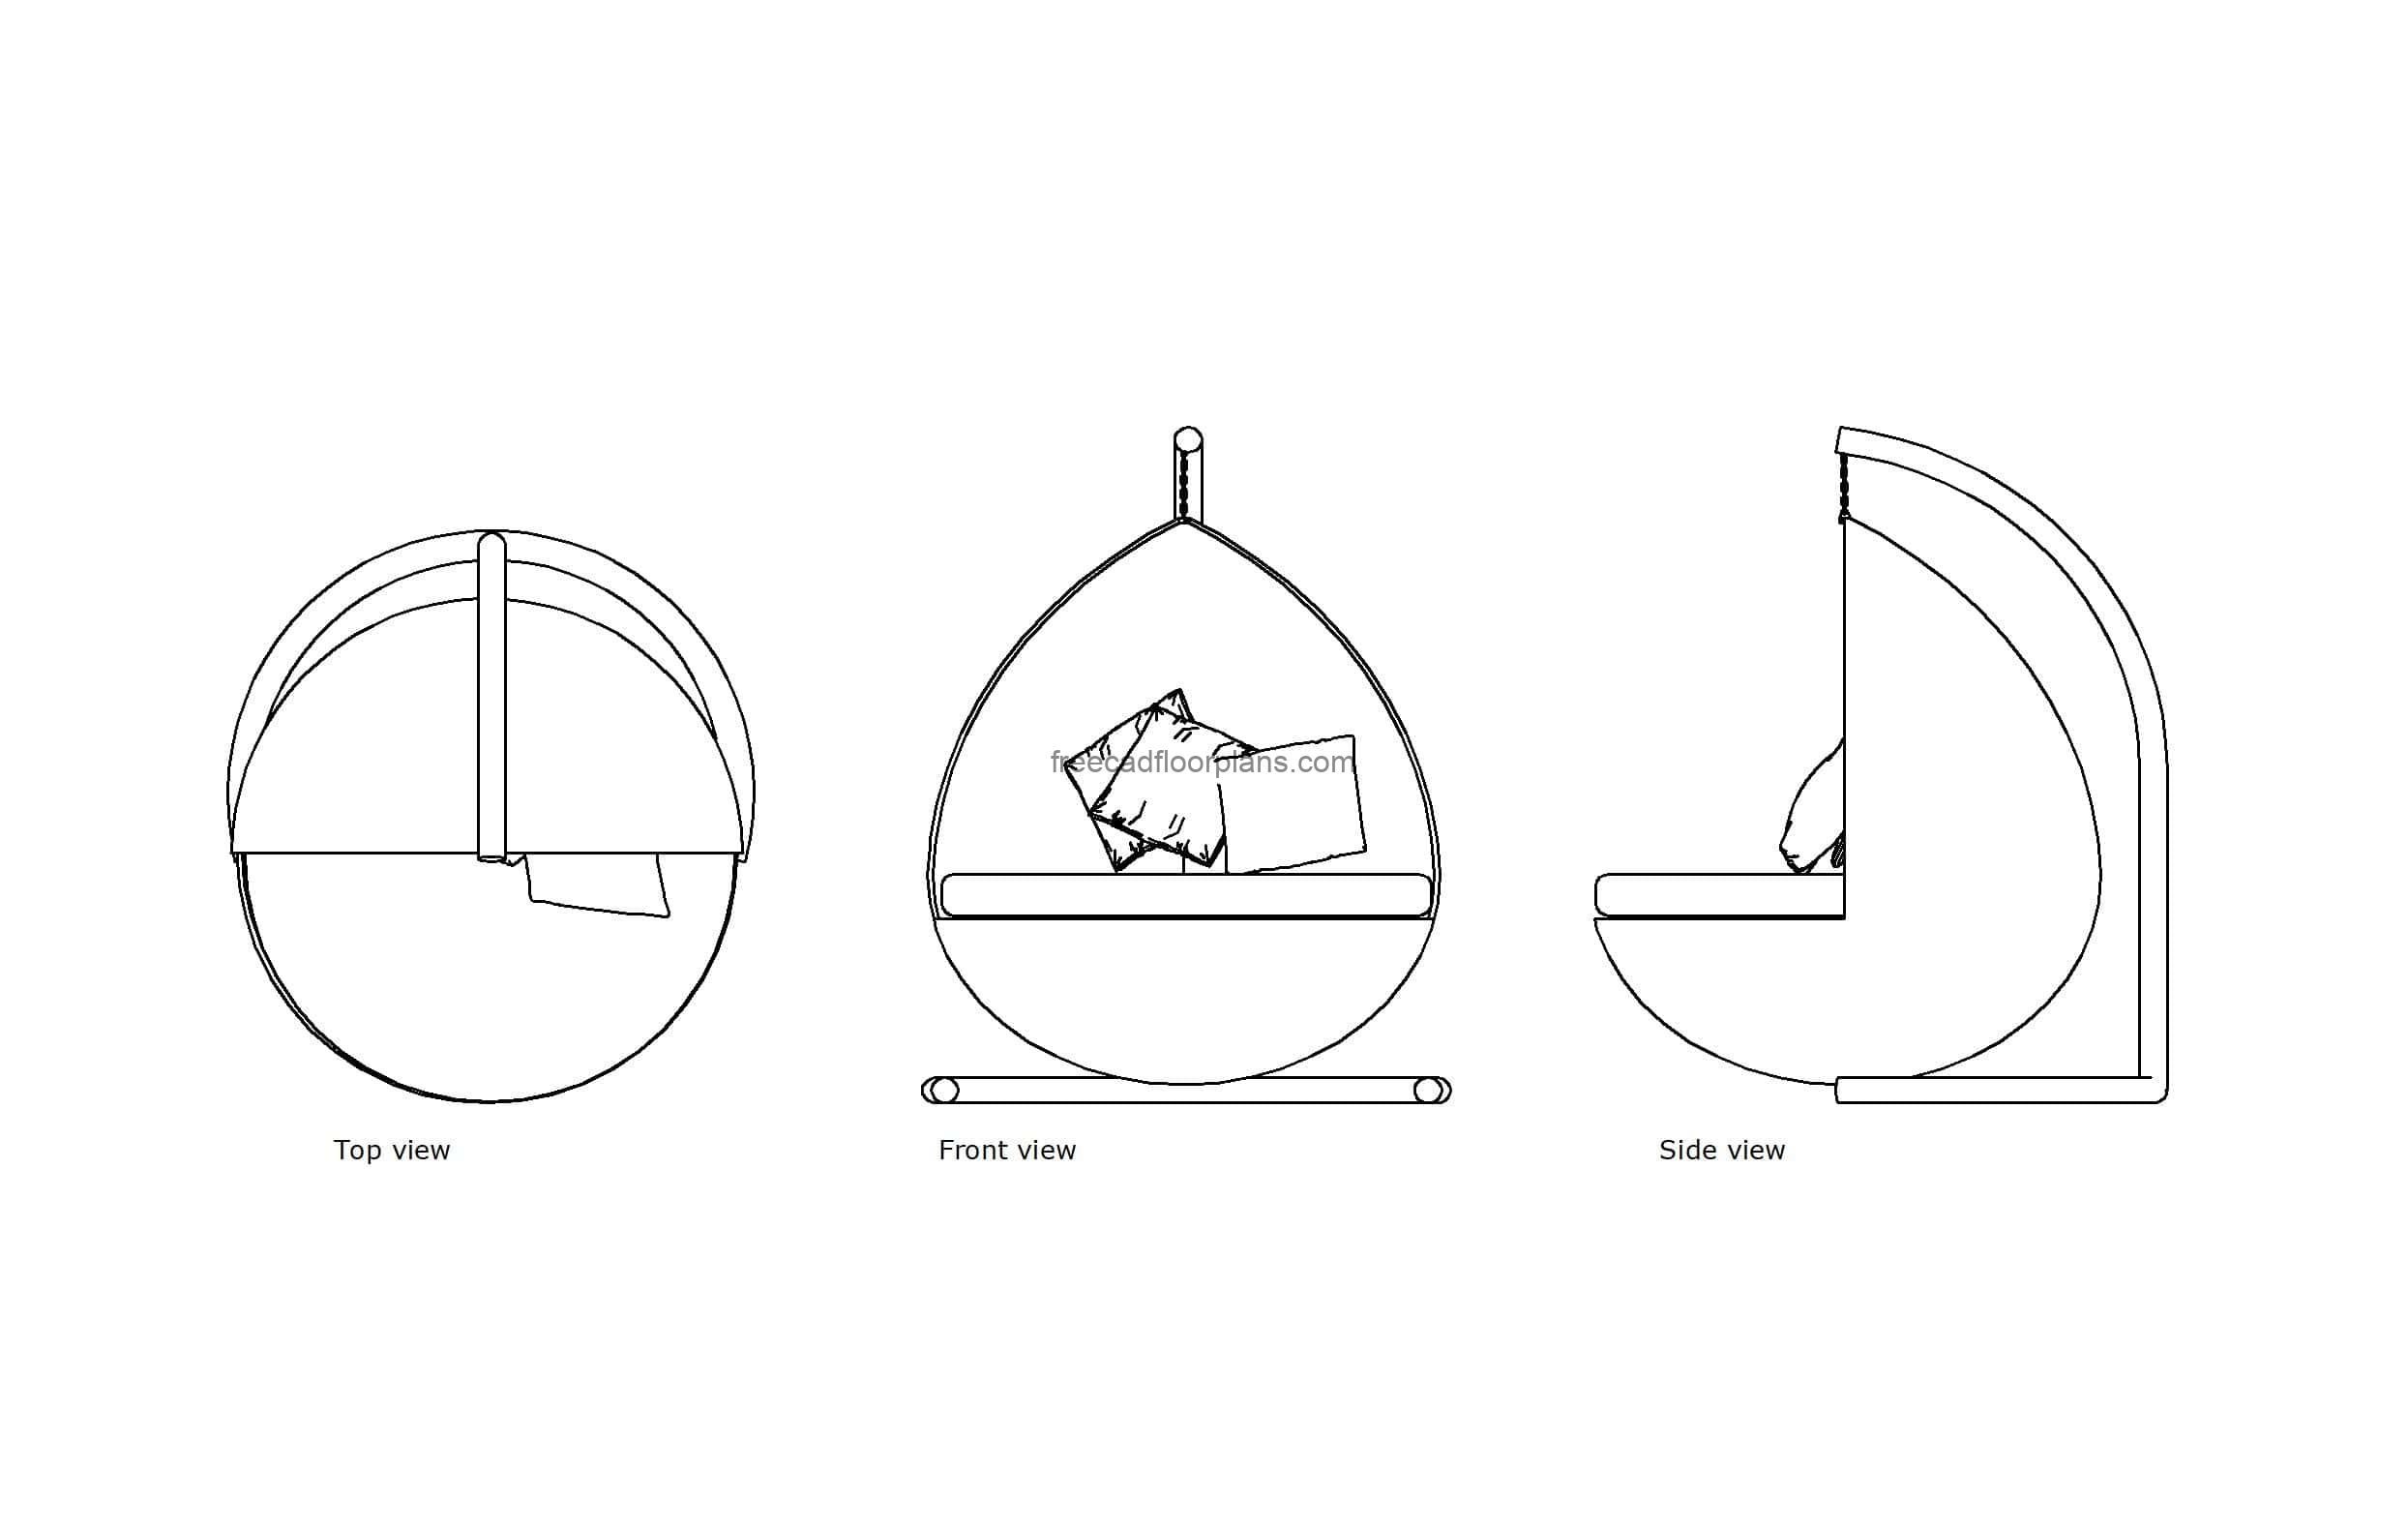 autocad drawing of an outdoor double hanging chair, plan and elevation 2d views, dwg file free for download